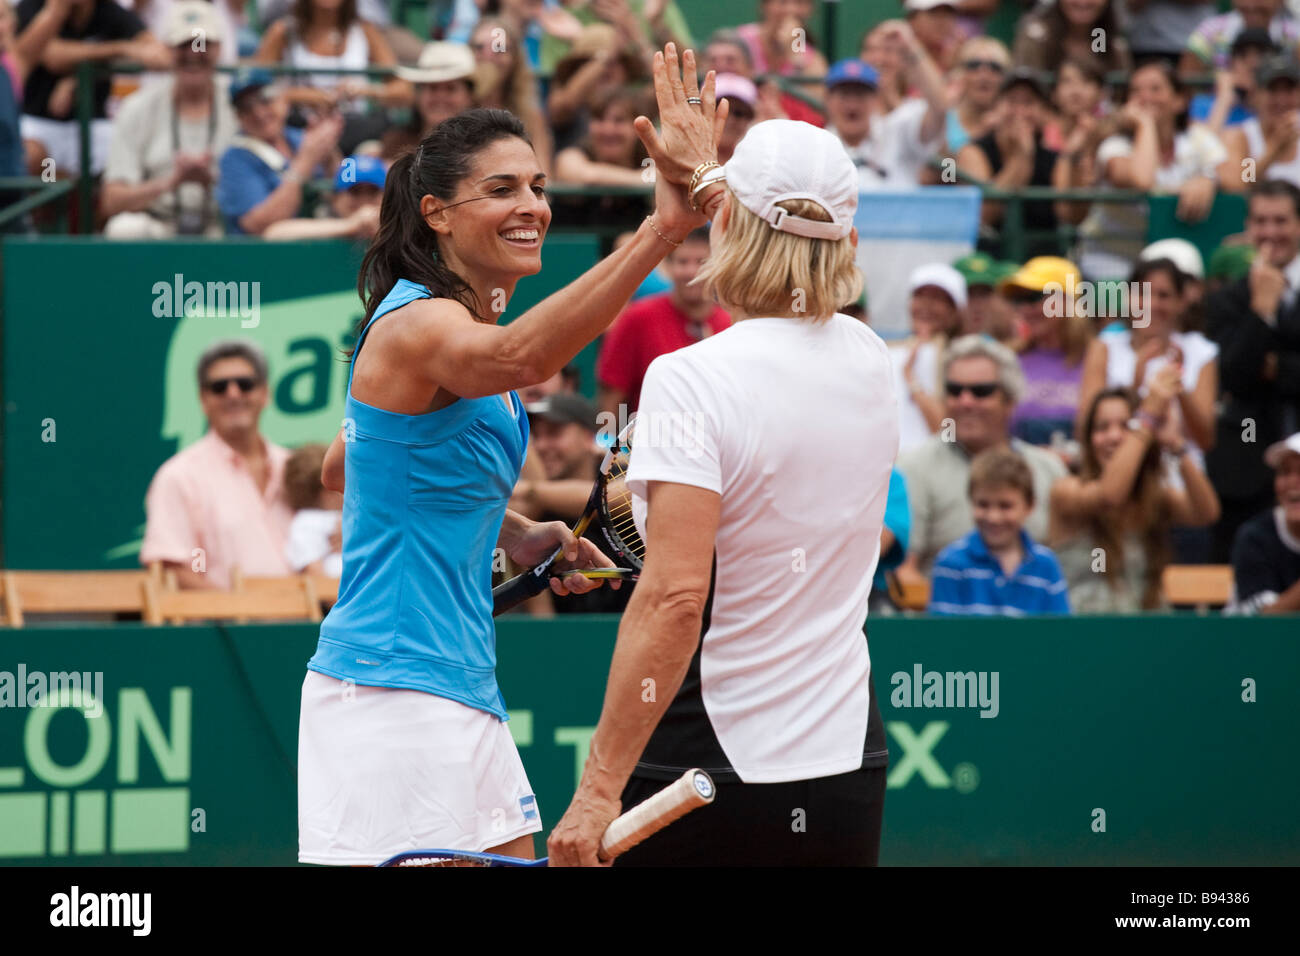 Gabriela Sabatini And Martina Navratilova Playing Together In A Fundraising Tennis Doubles Match In Buenos Aires Stock Photo Alamy